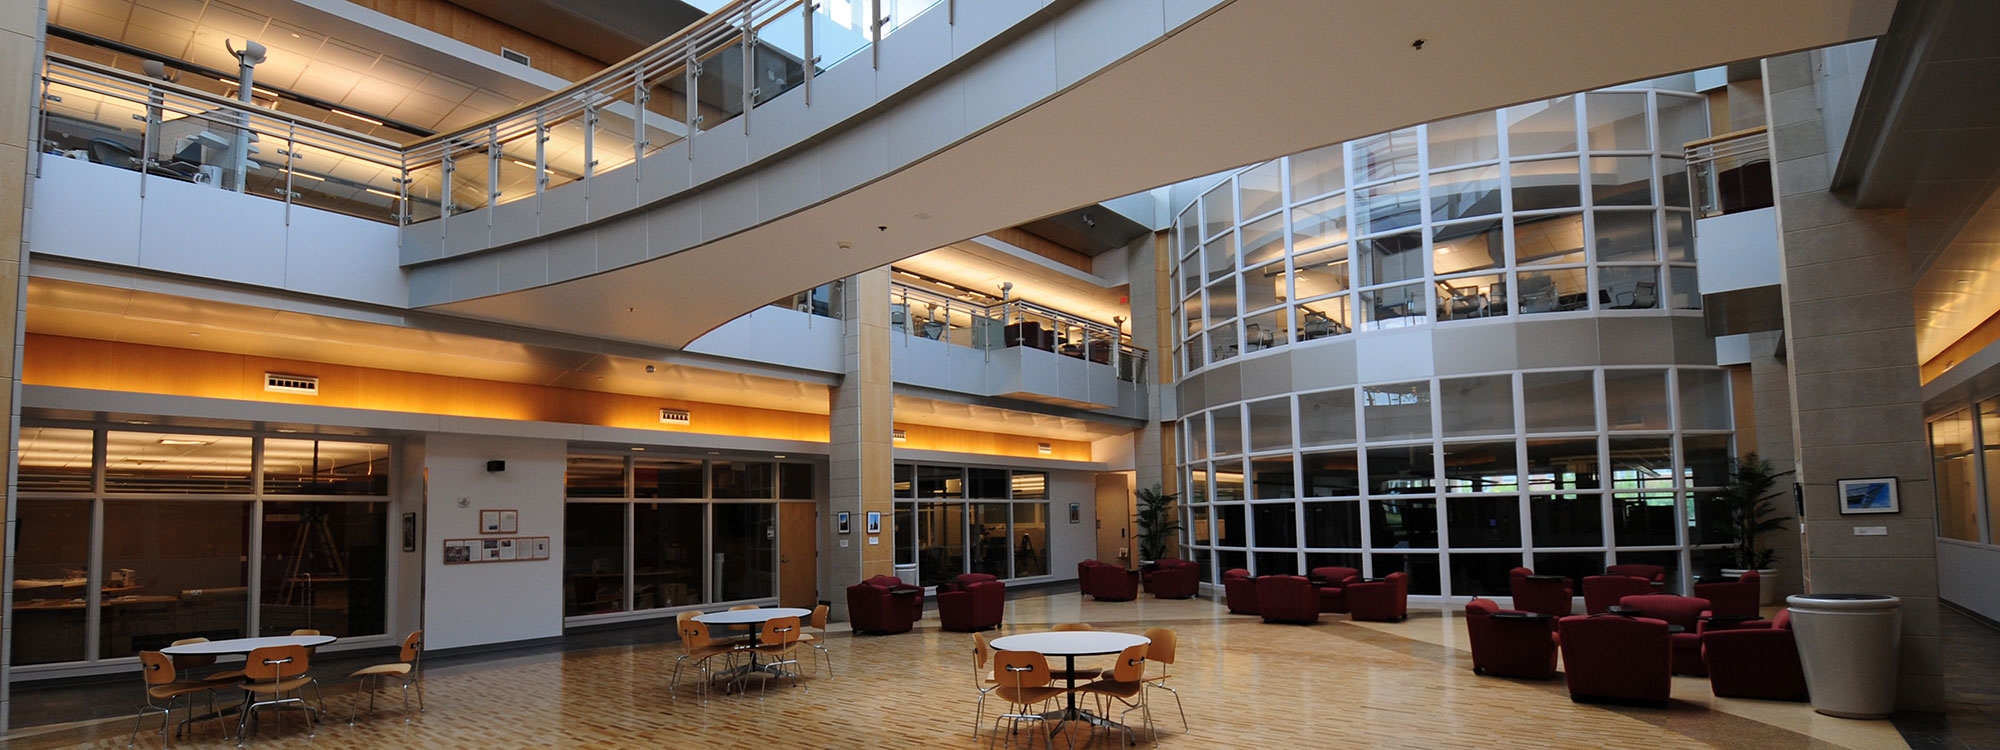 An interior atrium of the Stephenson Research and Technology Center, with tables and chairs.